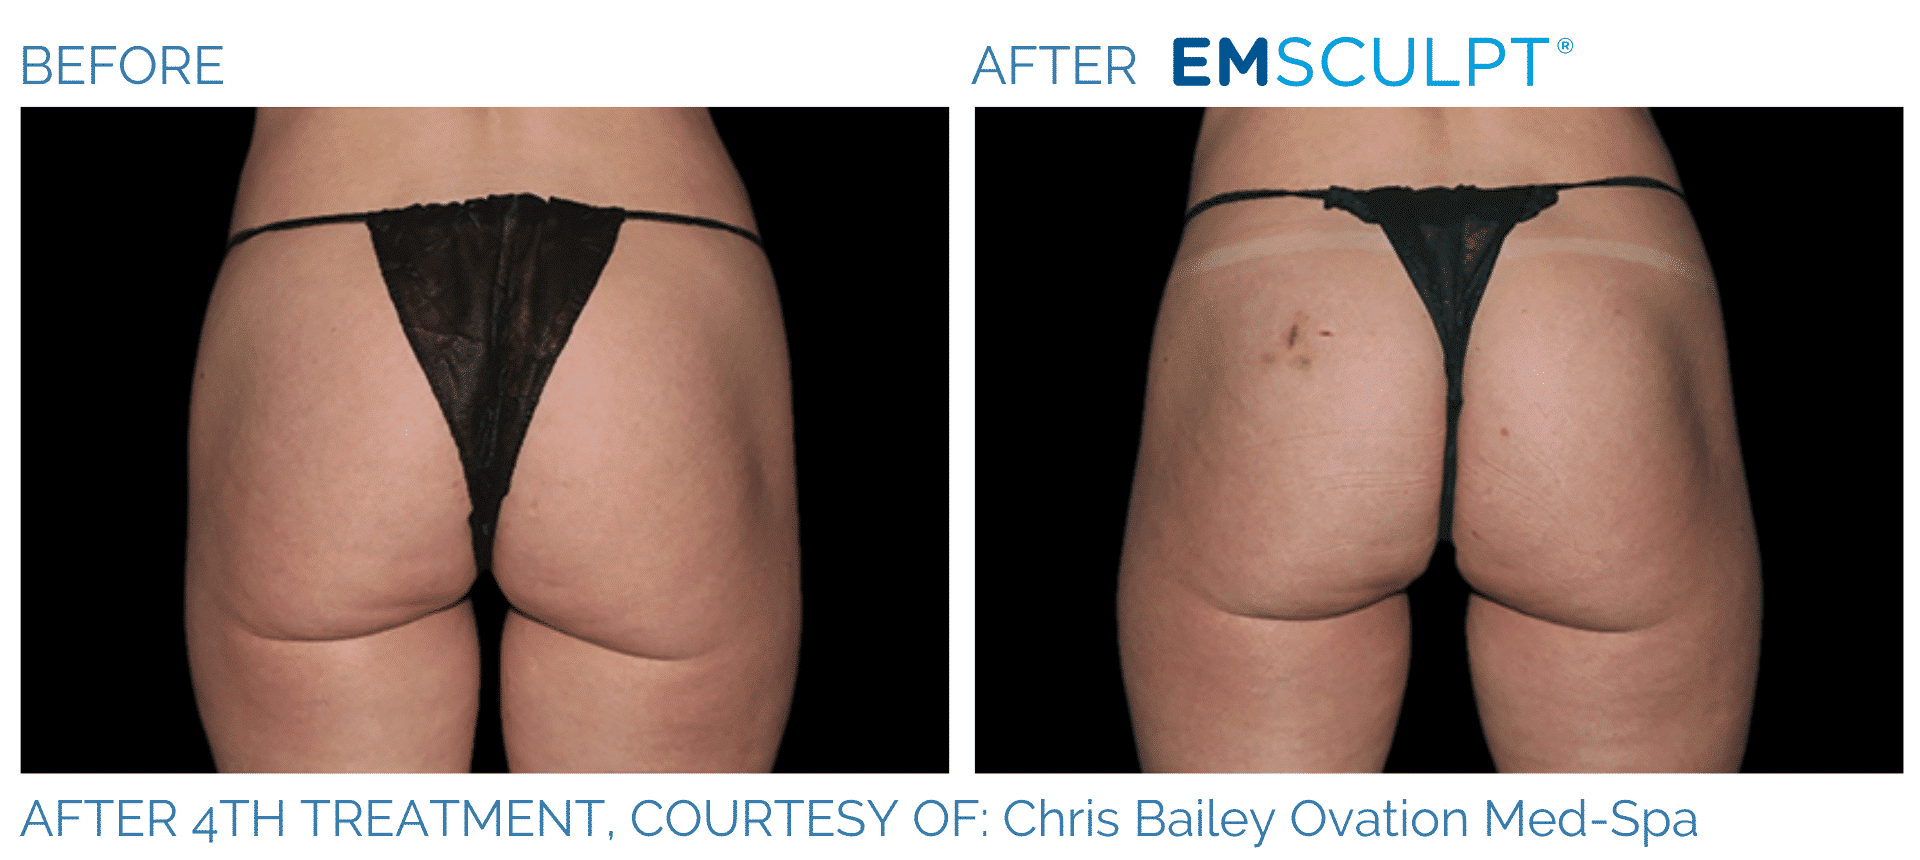 Emsculpt NEO Butt Before and After Treament